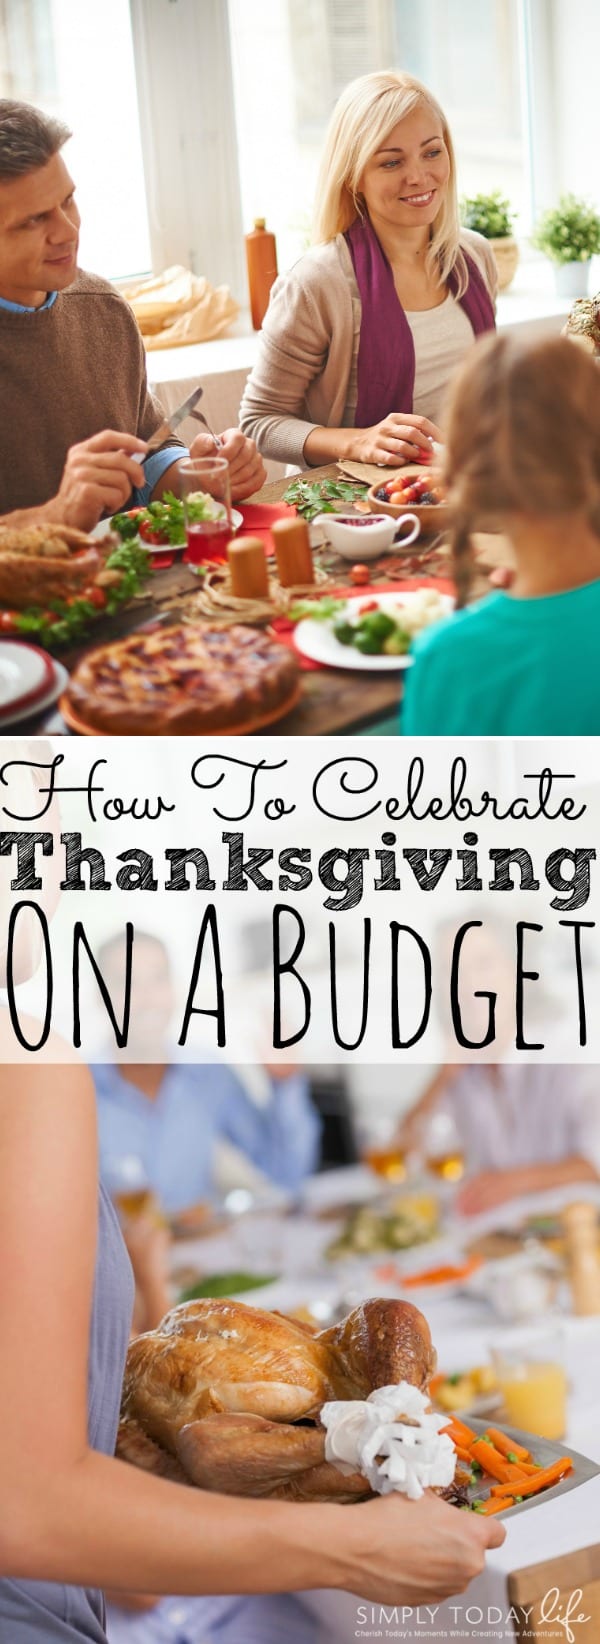 Celebrate Thanksgiving On A Budget